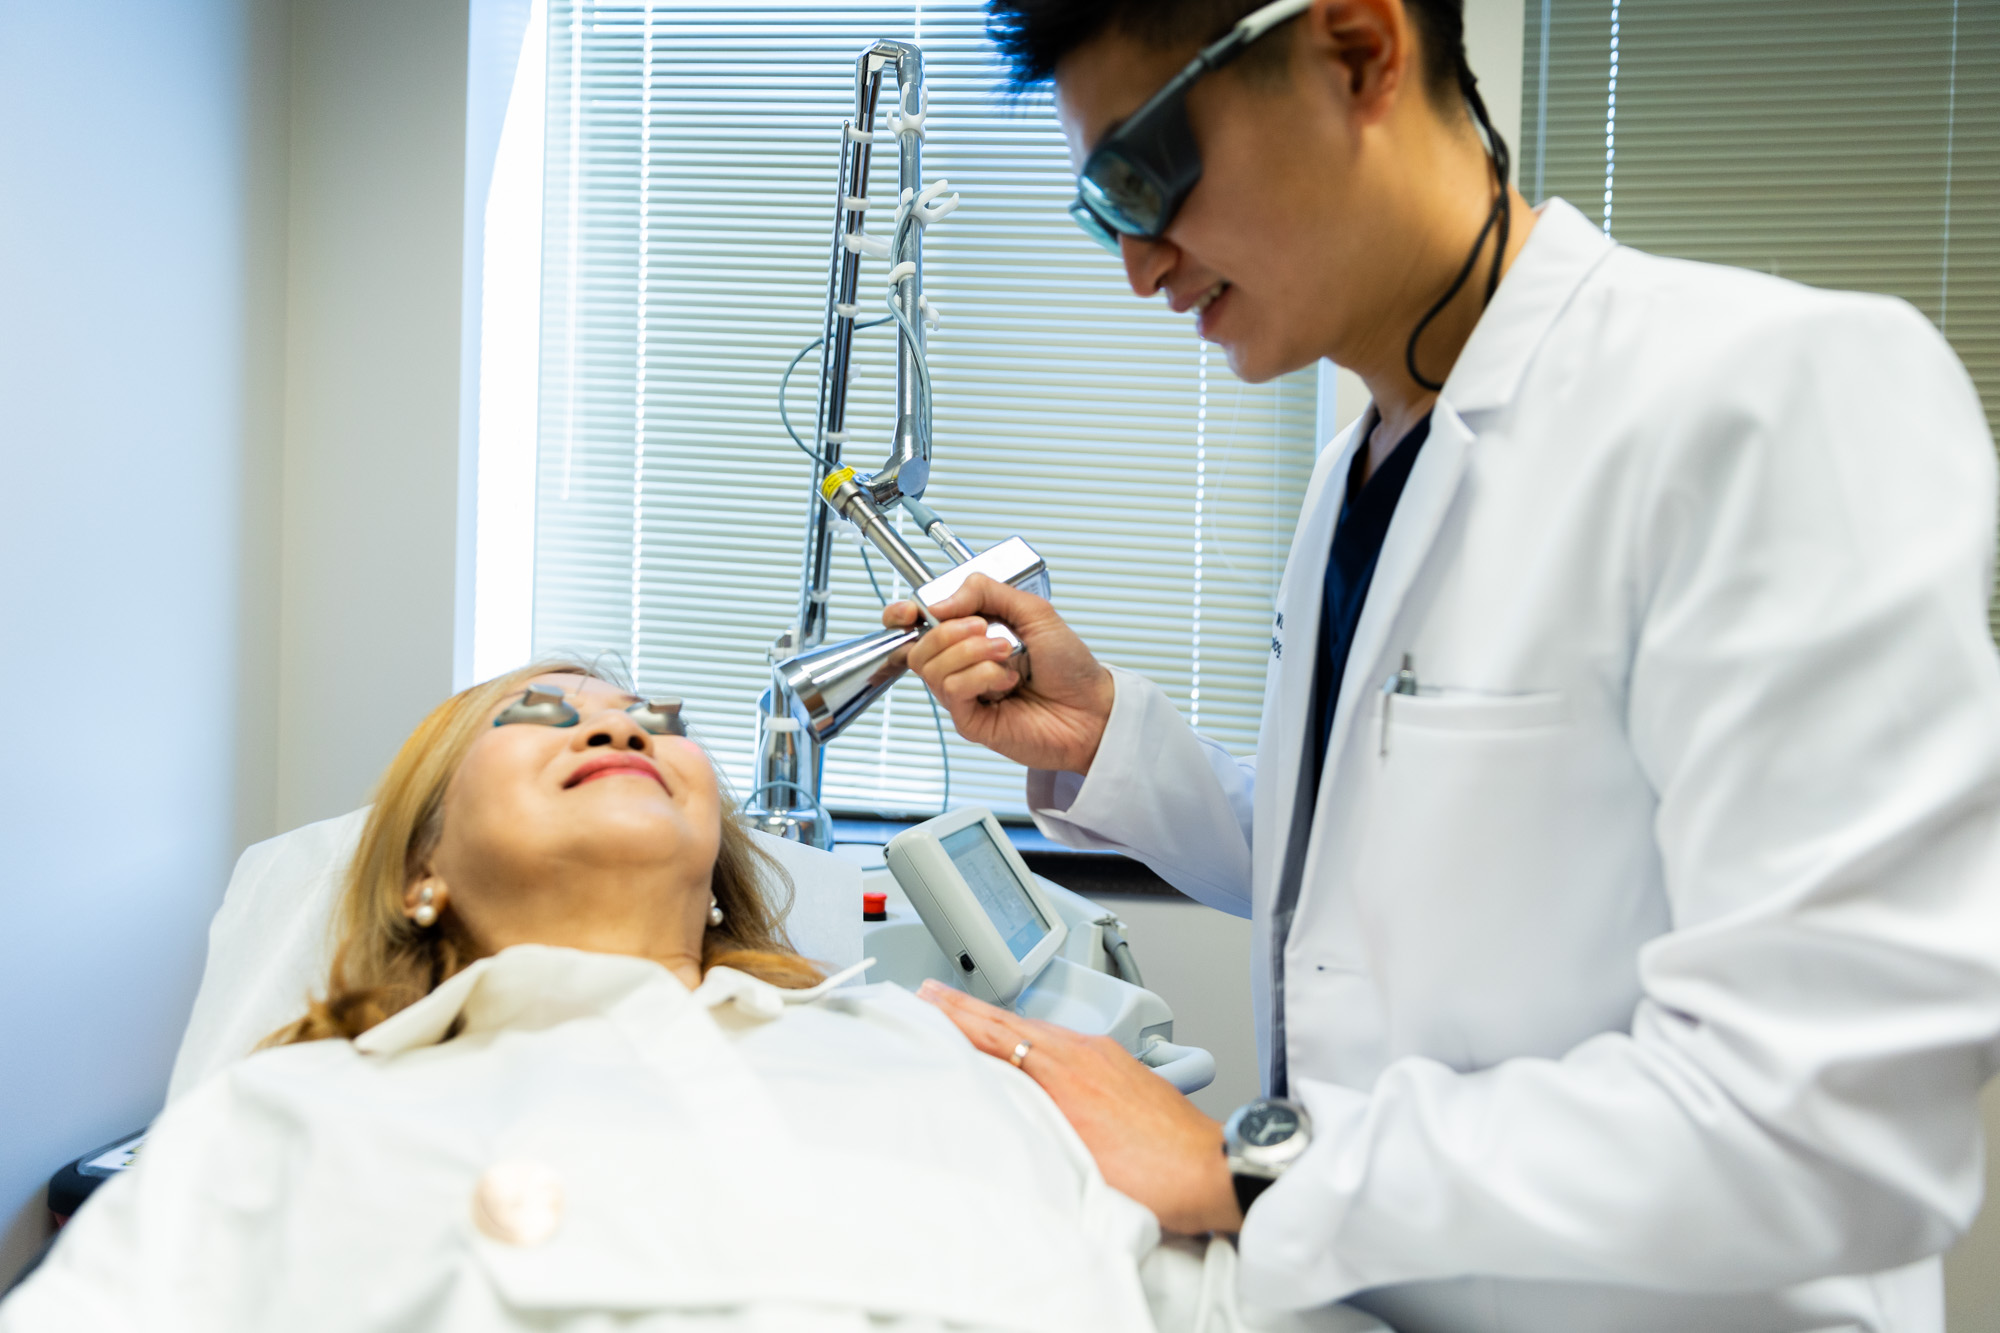 A Kansas City Skin and Cancer Center doctor holds the Contour TRL machine several inches away from a female client's face. She is lying down with eye covers on.